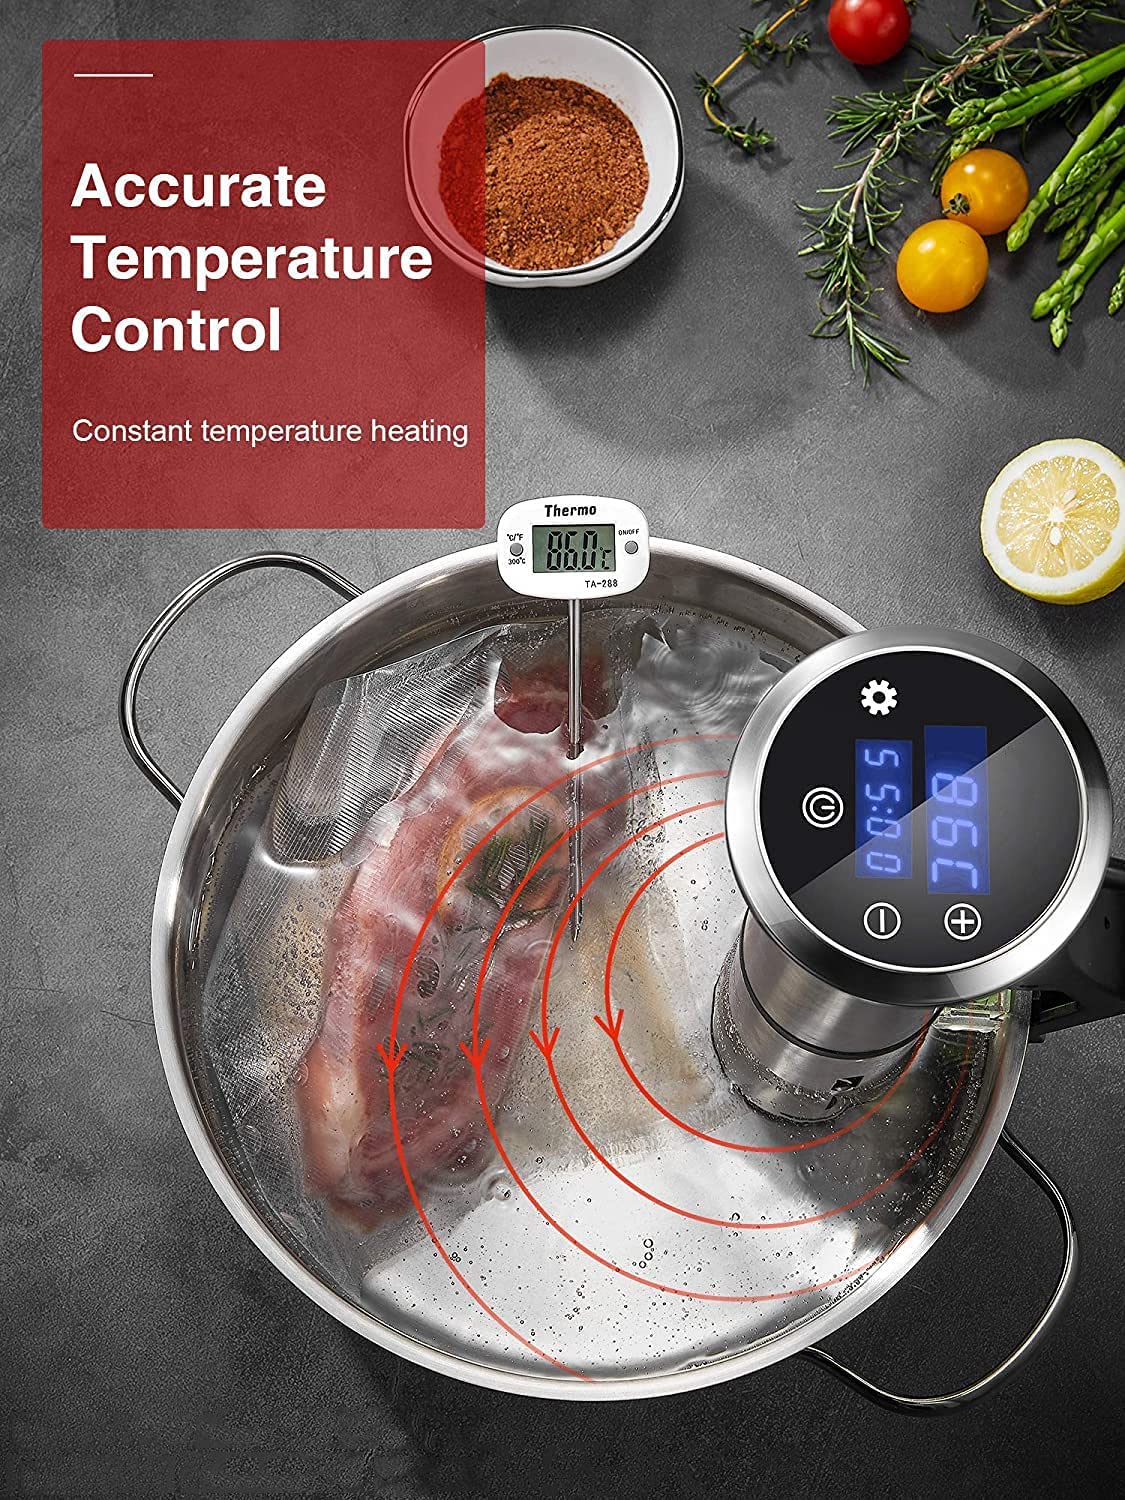 DEIK Sous Vide, 1200W Slow Cooker, Roner IPX7 Water Resistance, Bain Marie  Cooking Machine with LED Touch Screen, Temperature Control and Scheduled